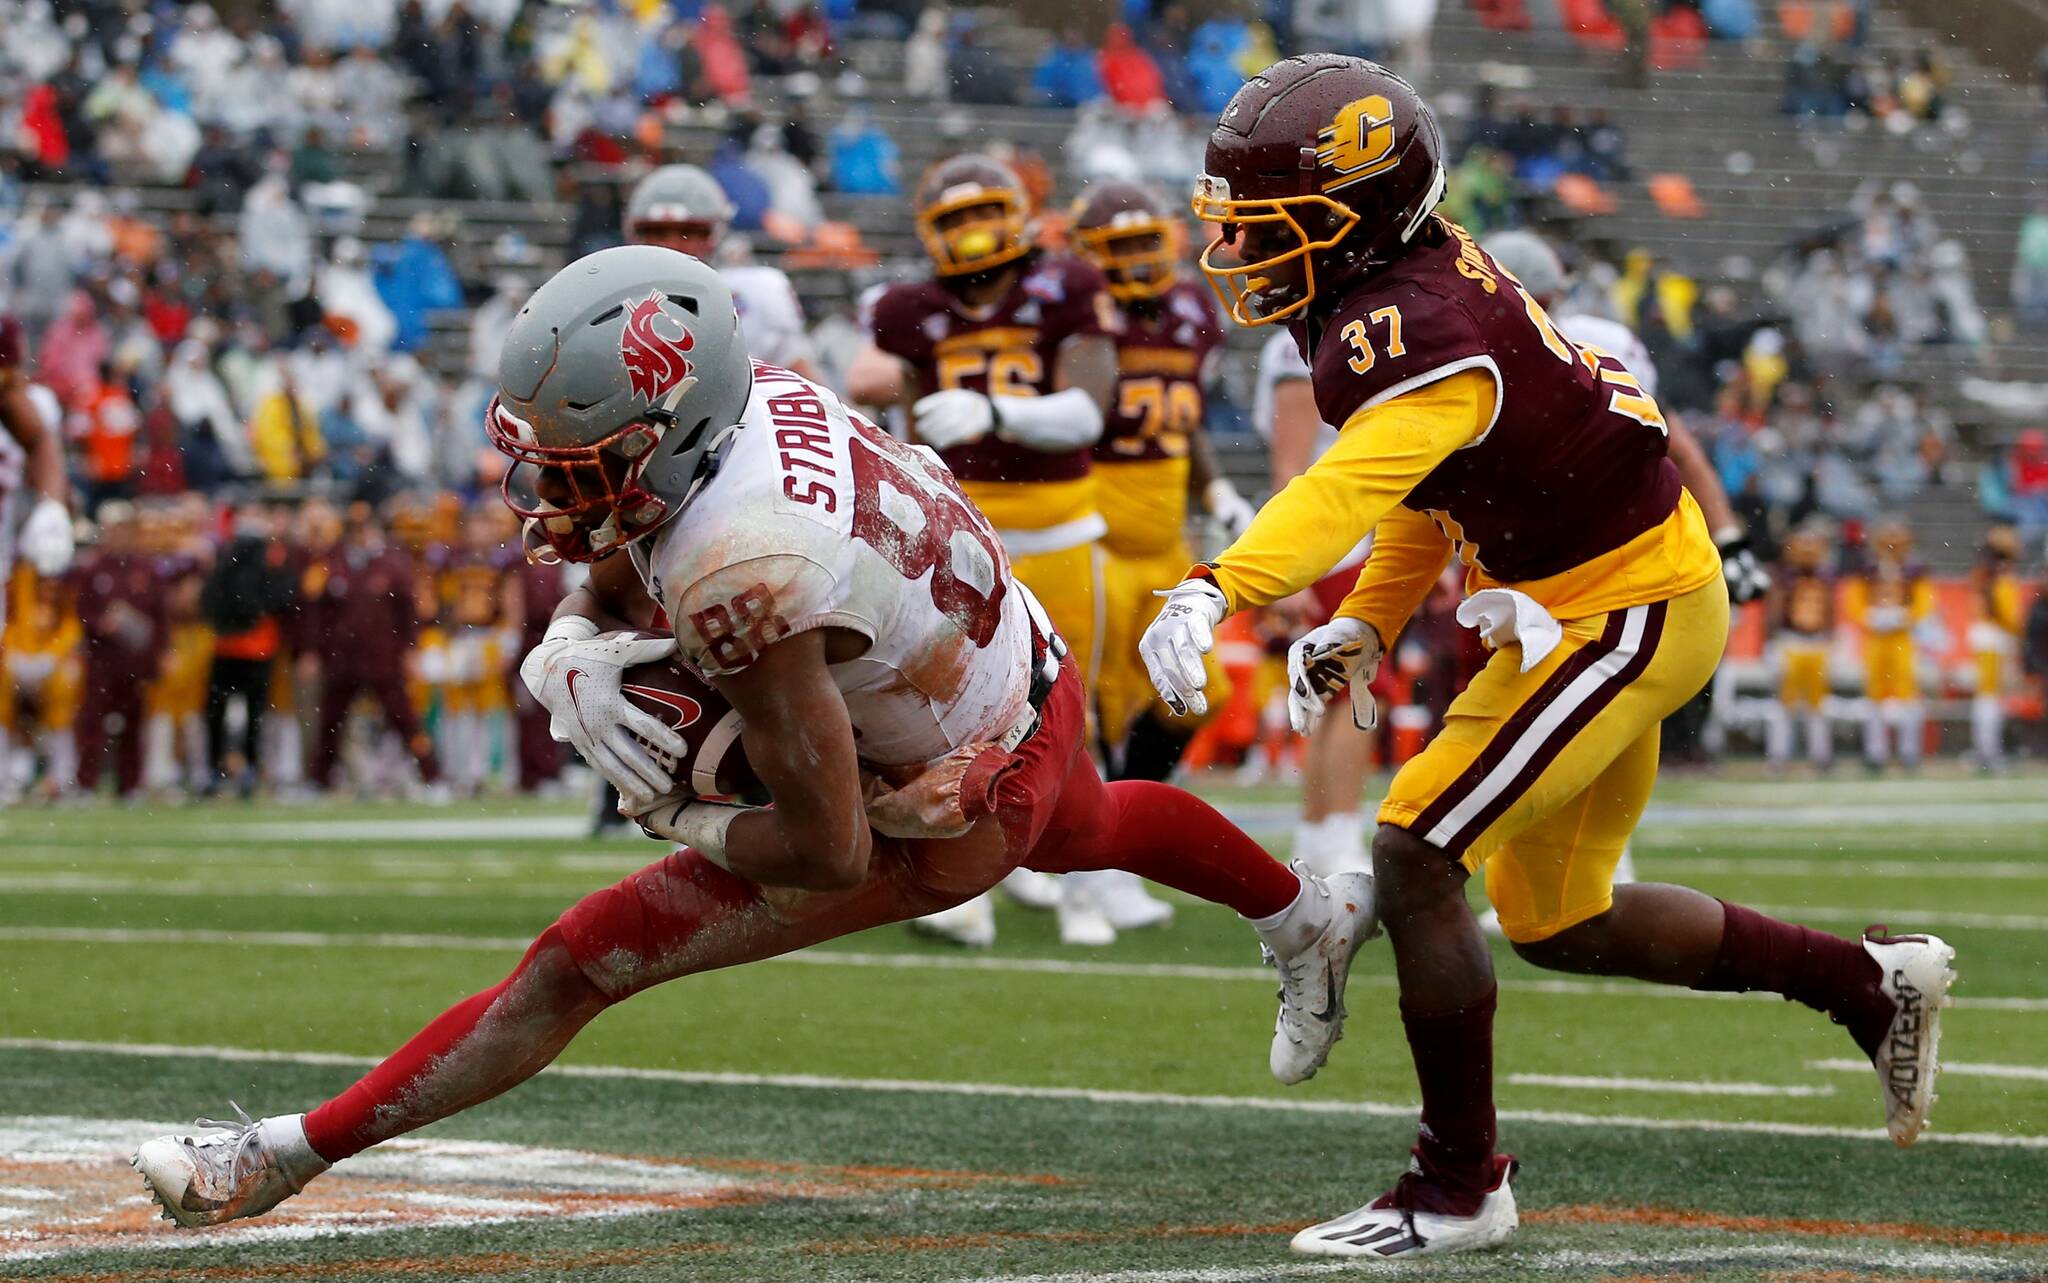 Washington State wide receiver De'Zhaun Stribling (88) catches a pass in the end zone to score a touchdown as he's defended by Central Michigan defensive back Rolliann Sturkey (37) during the second half of the Sun Bowl NCAA college football game in El Paso, Texas, Friday, Dec. 31, 2021. (AP Photo/Andres Leighton)